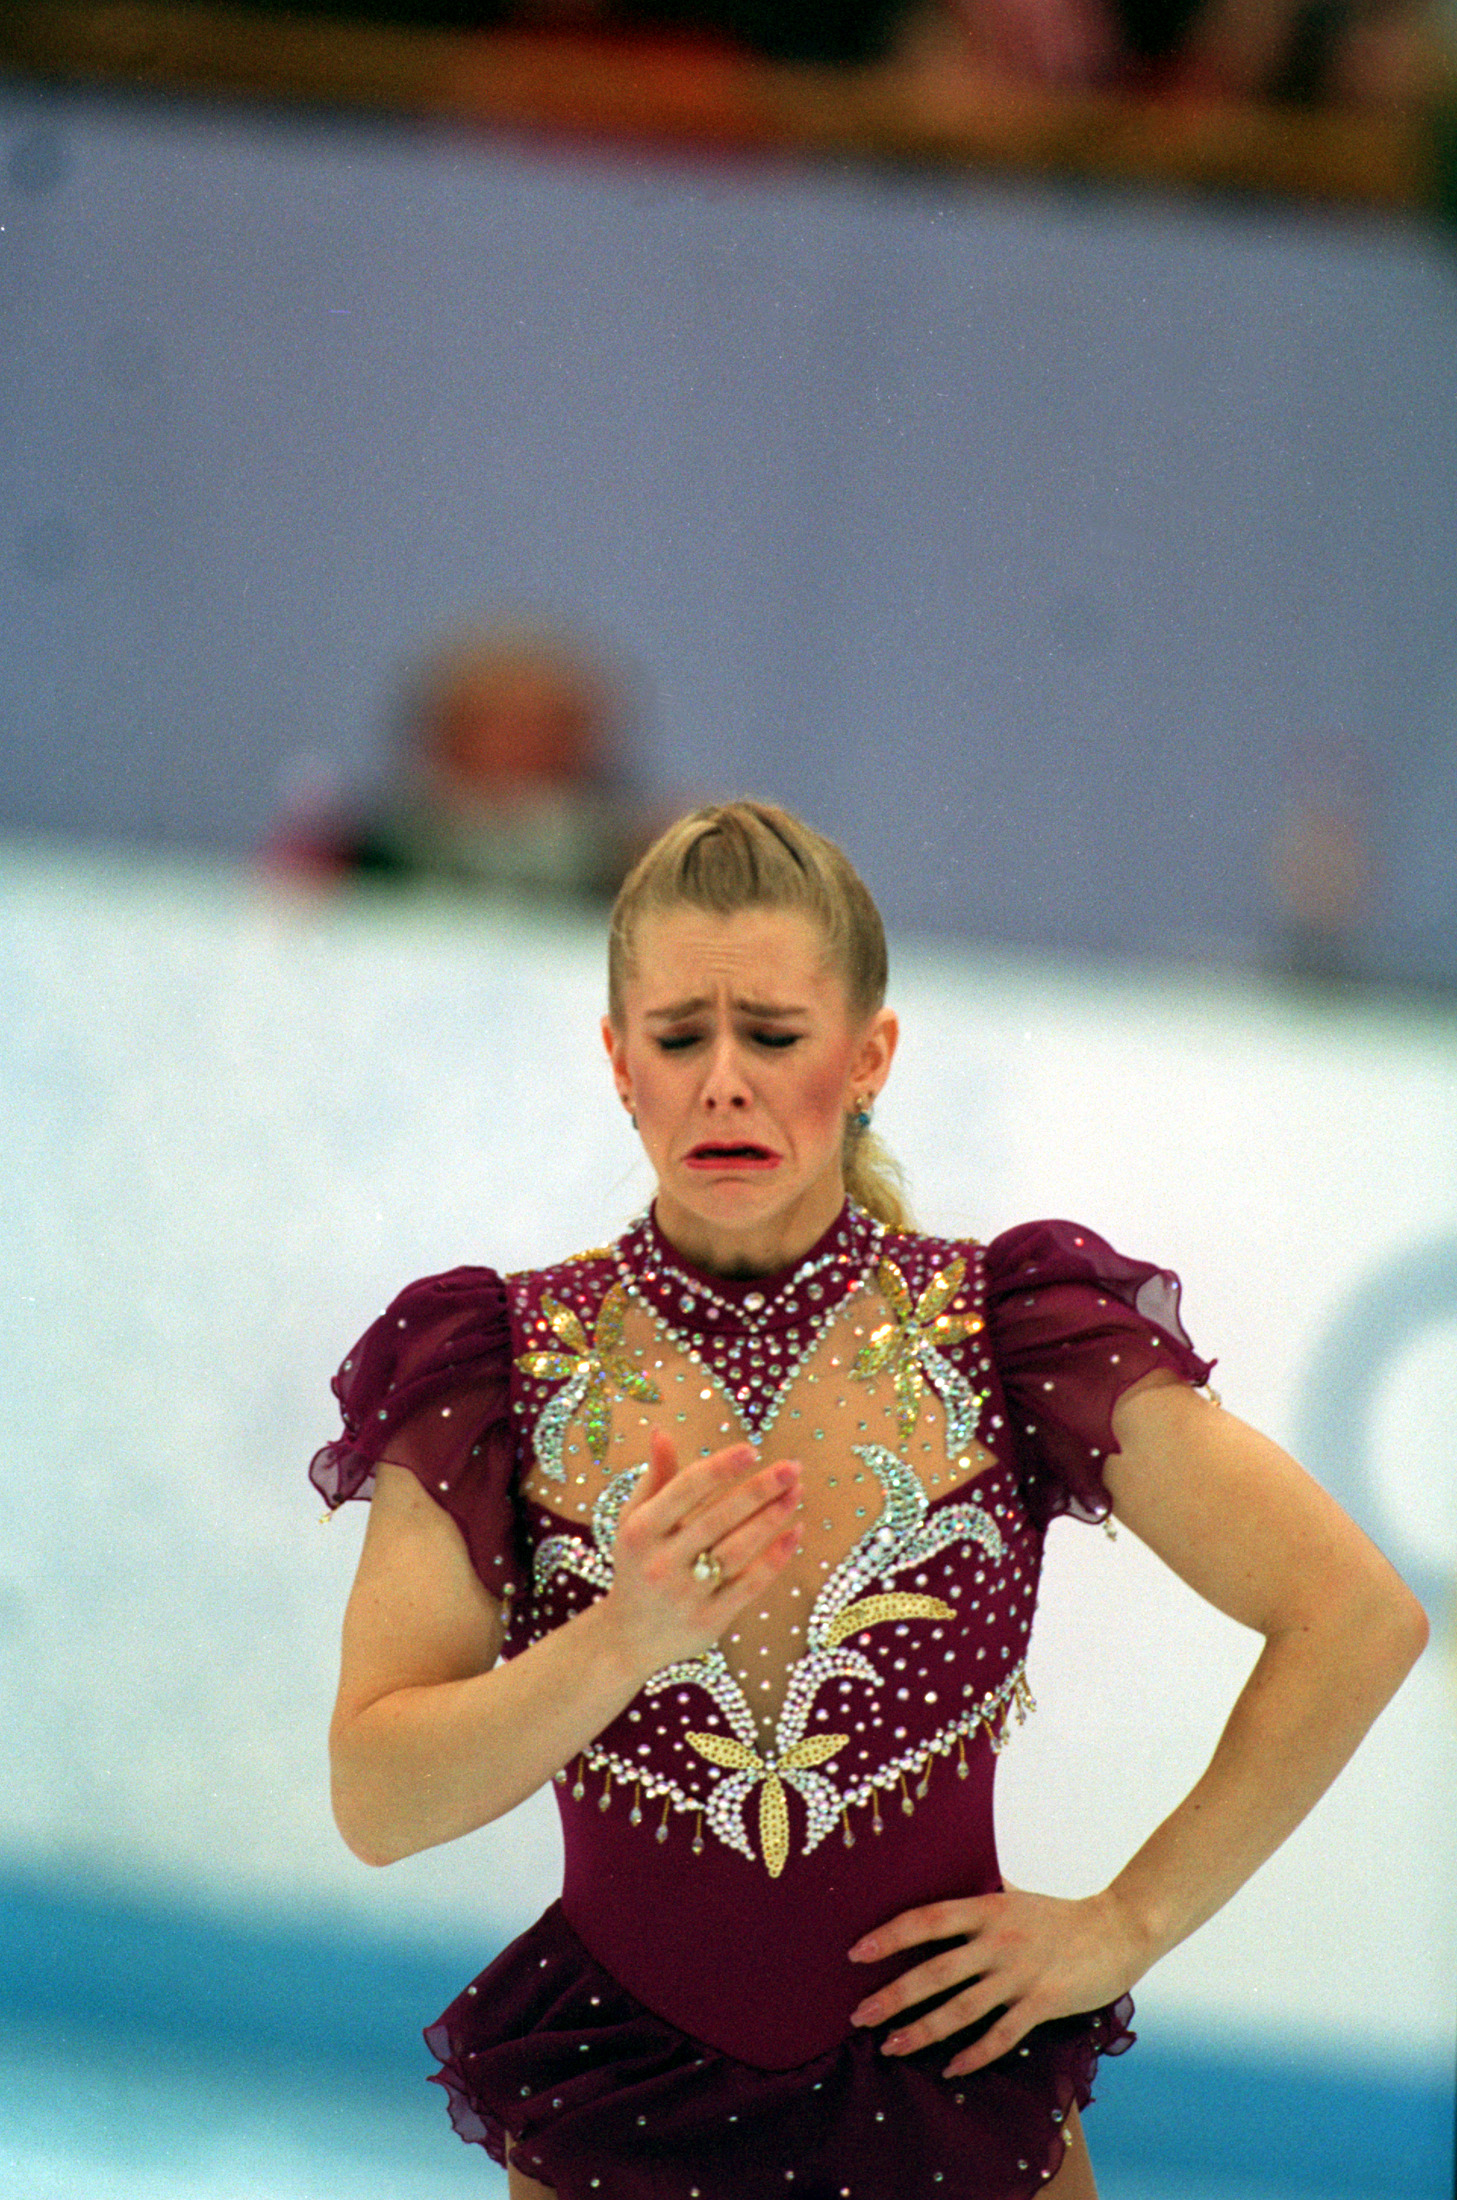 23 FEB 1994:  TONYA HARDING OF THE UNITED STATES LEAVES THE ICE IN TEARS, INTERUPTING HER FREE PROGRAM AT THE 1994 LILLEHAMMER WINTER OLYMPICS.  AFTER CONSULTING THE JUDGES SHE WAS ALLOWED MORE TIME TO REPAIR HER BOOT LACE AND RETURNED TO FINISH HER PROGR